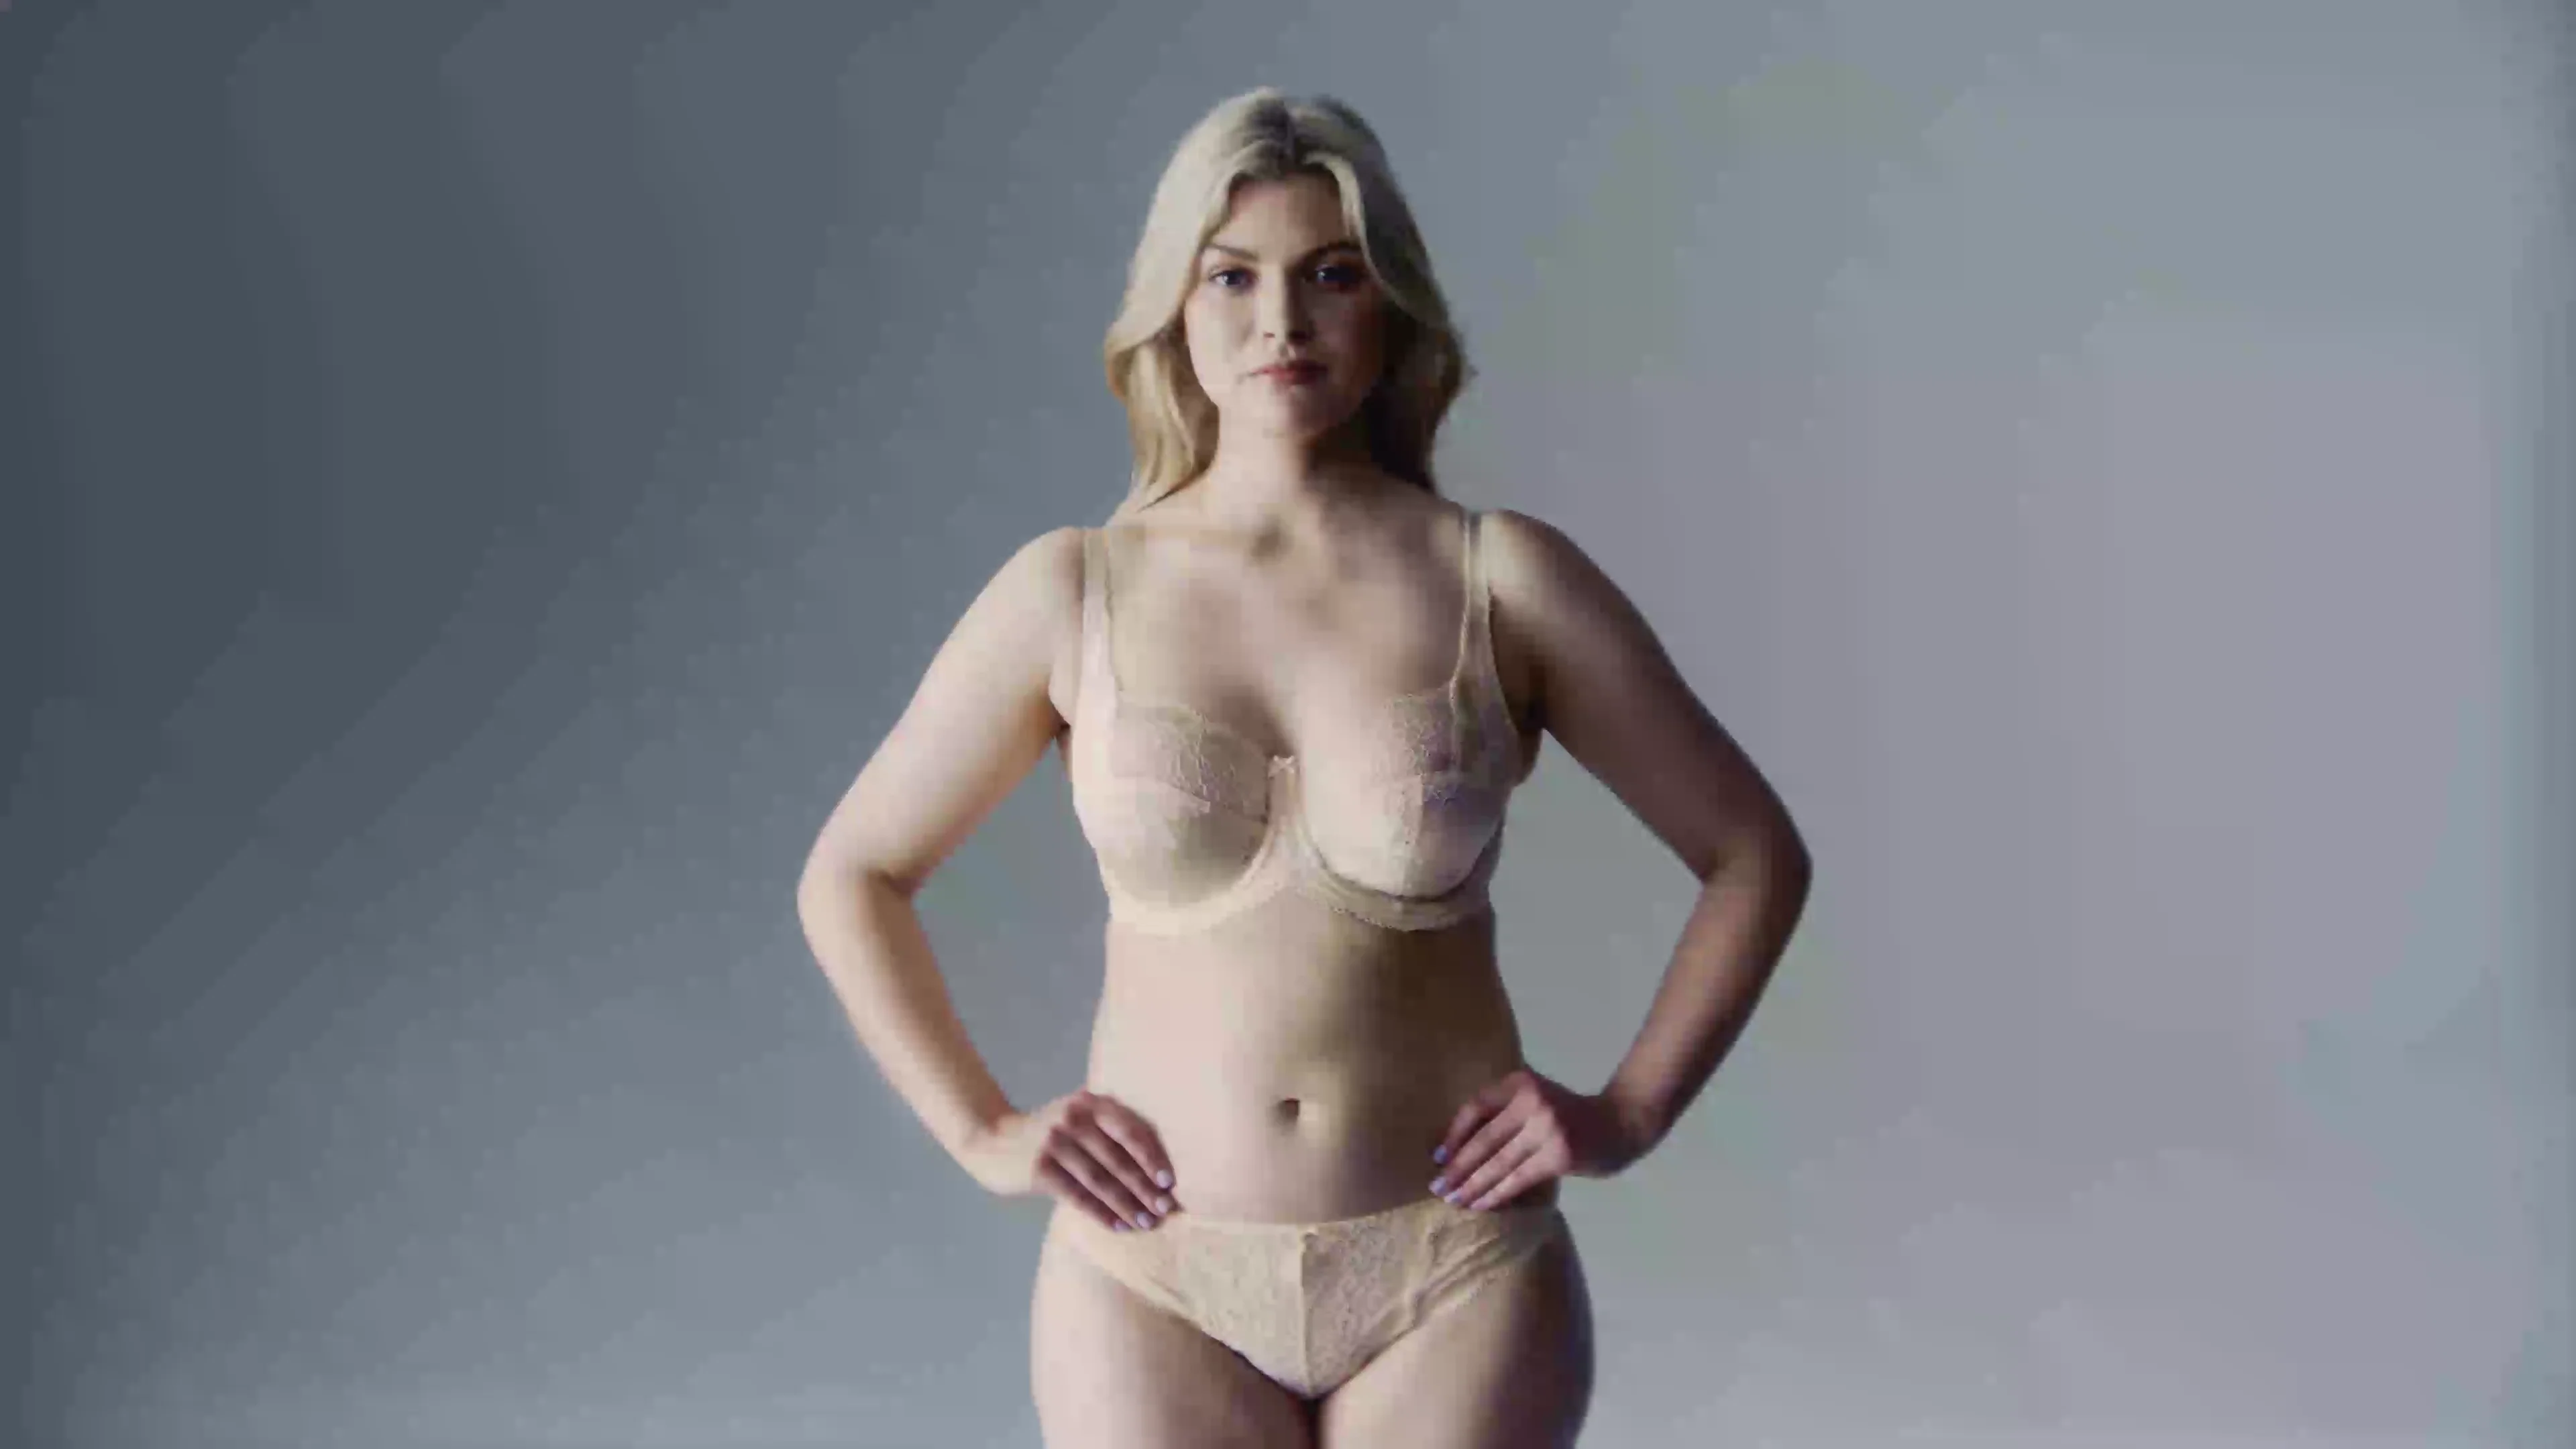 Find Your Perfect Bra Fit on Vimeo